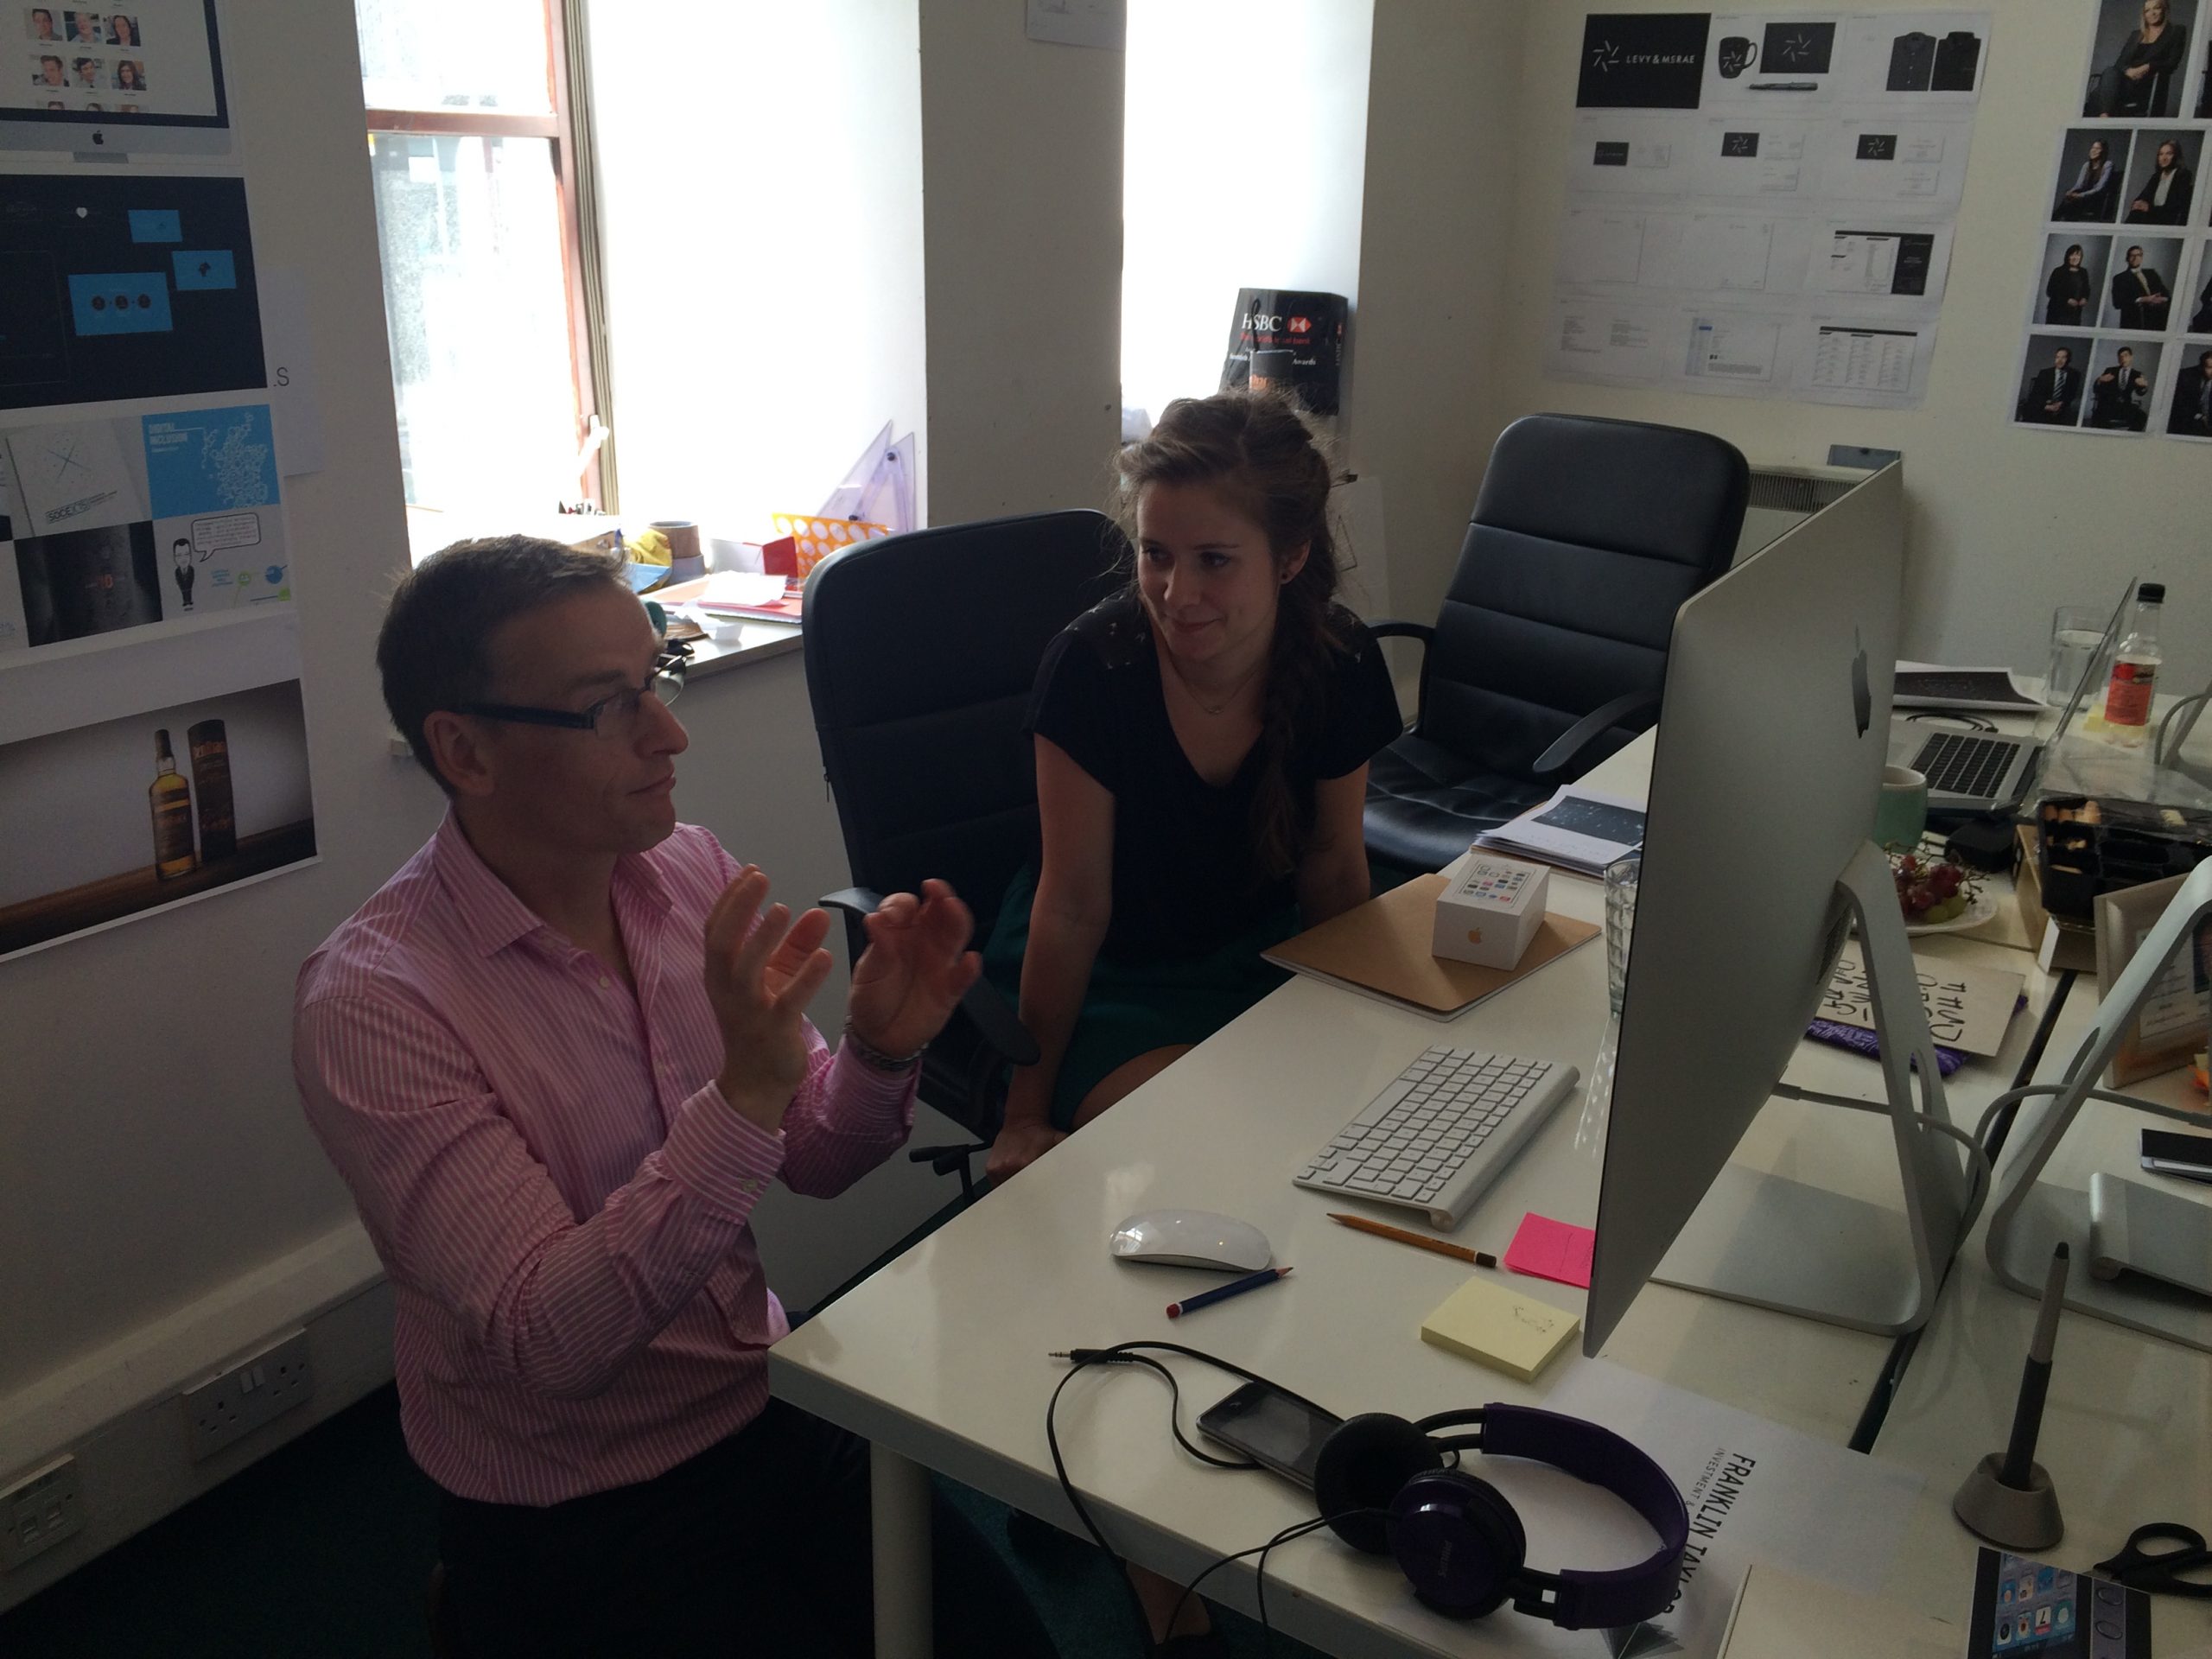 ‘Intense conversations’ Great pic of our designer Fruzsina and Steffen deep in discussion about his new brand.